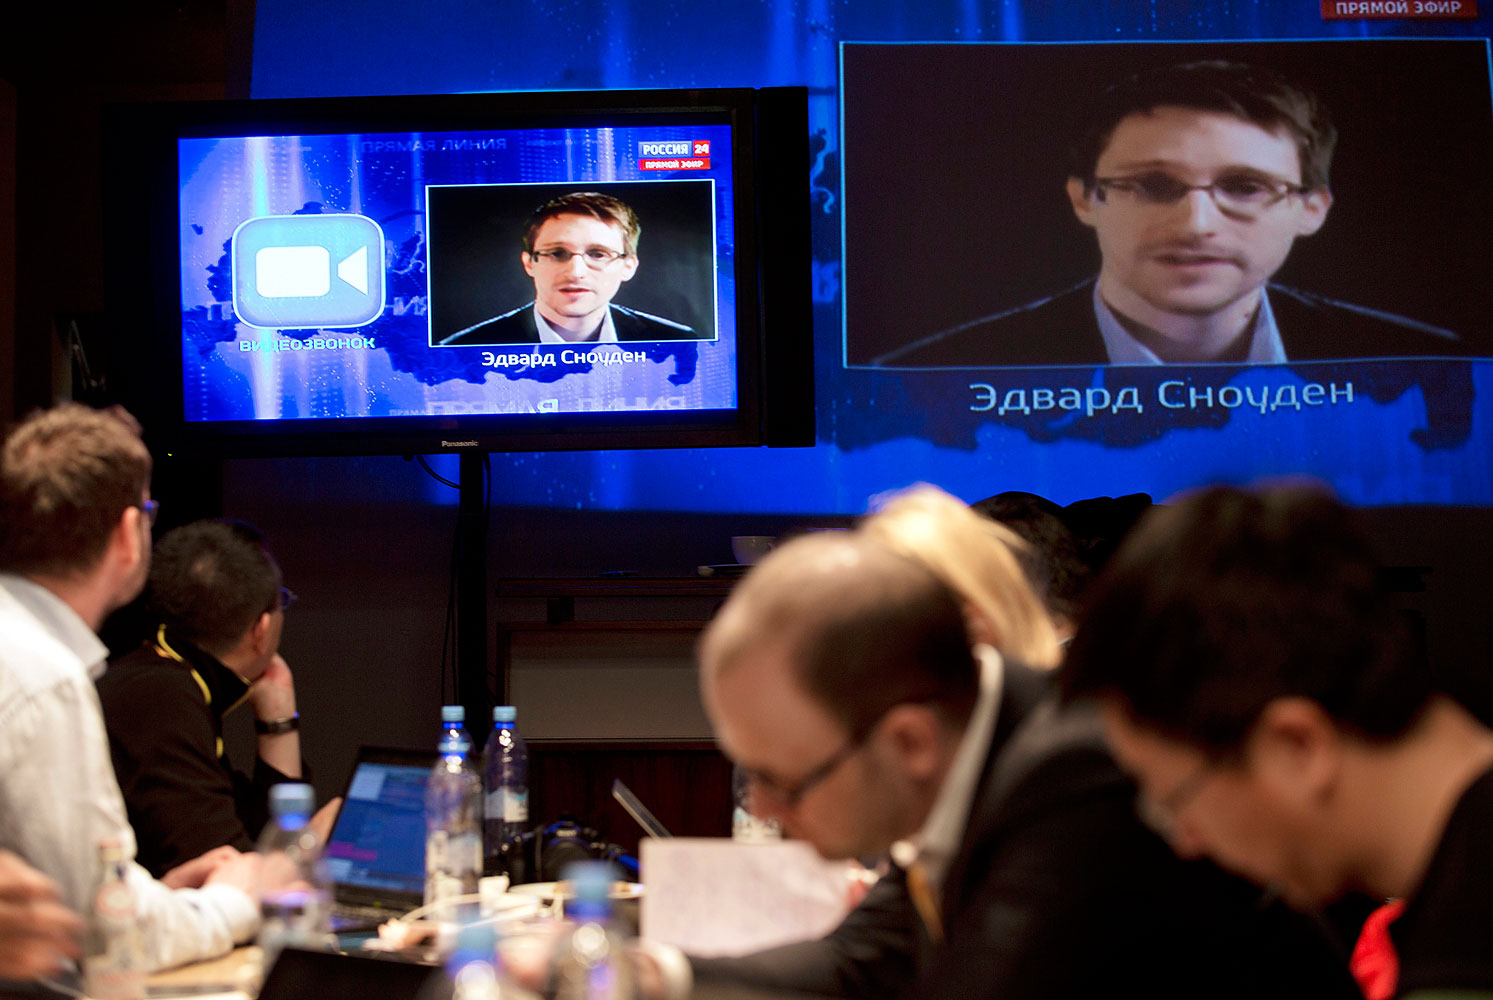 Edward Snowden, displayed on television screens, asks a question to Russian President Vladimir Putin during a nationally televised question-and-answer session, in Moscow, Thursday, April 17, 2014. (Pavel Golovkin—AP)